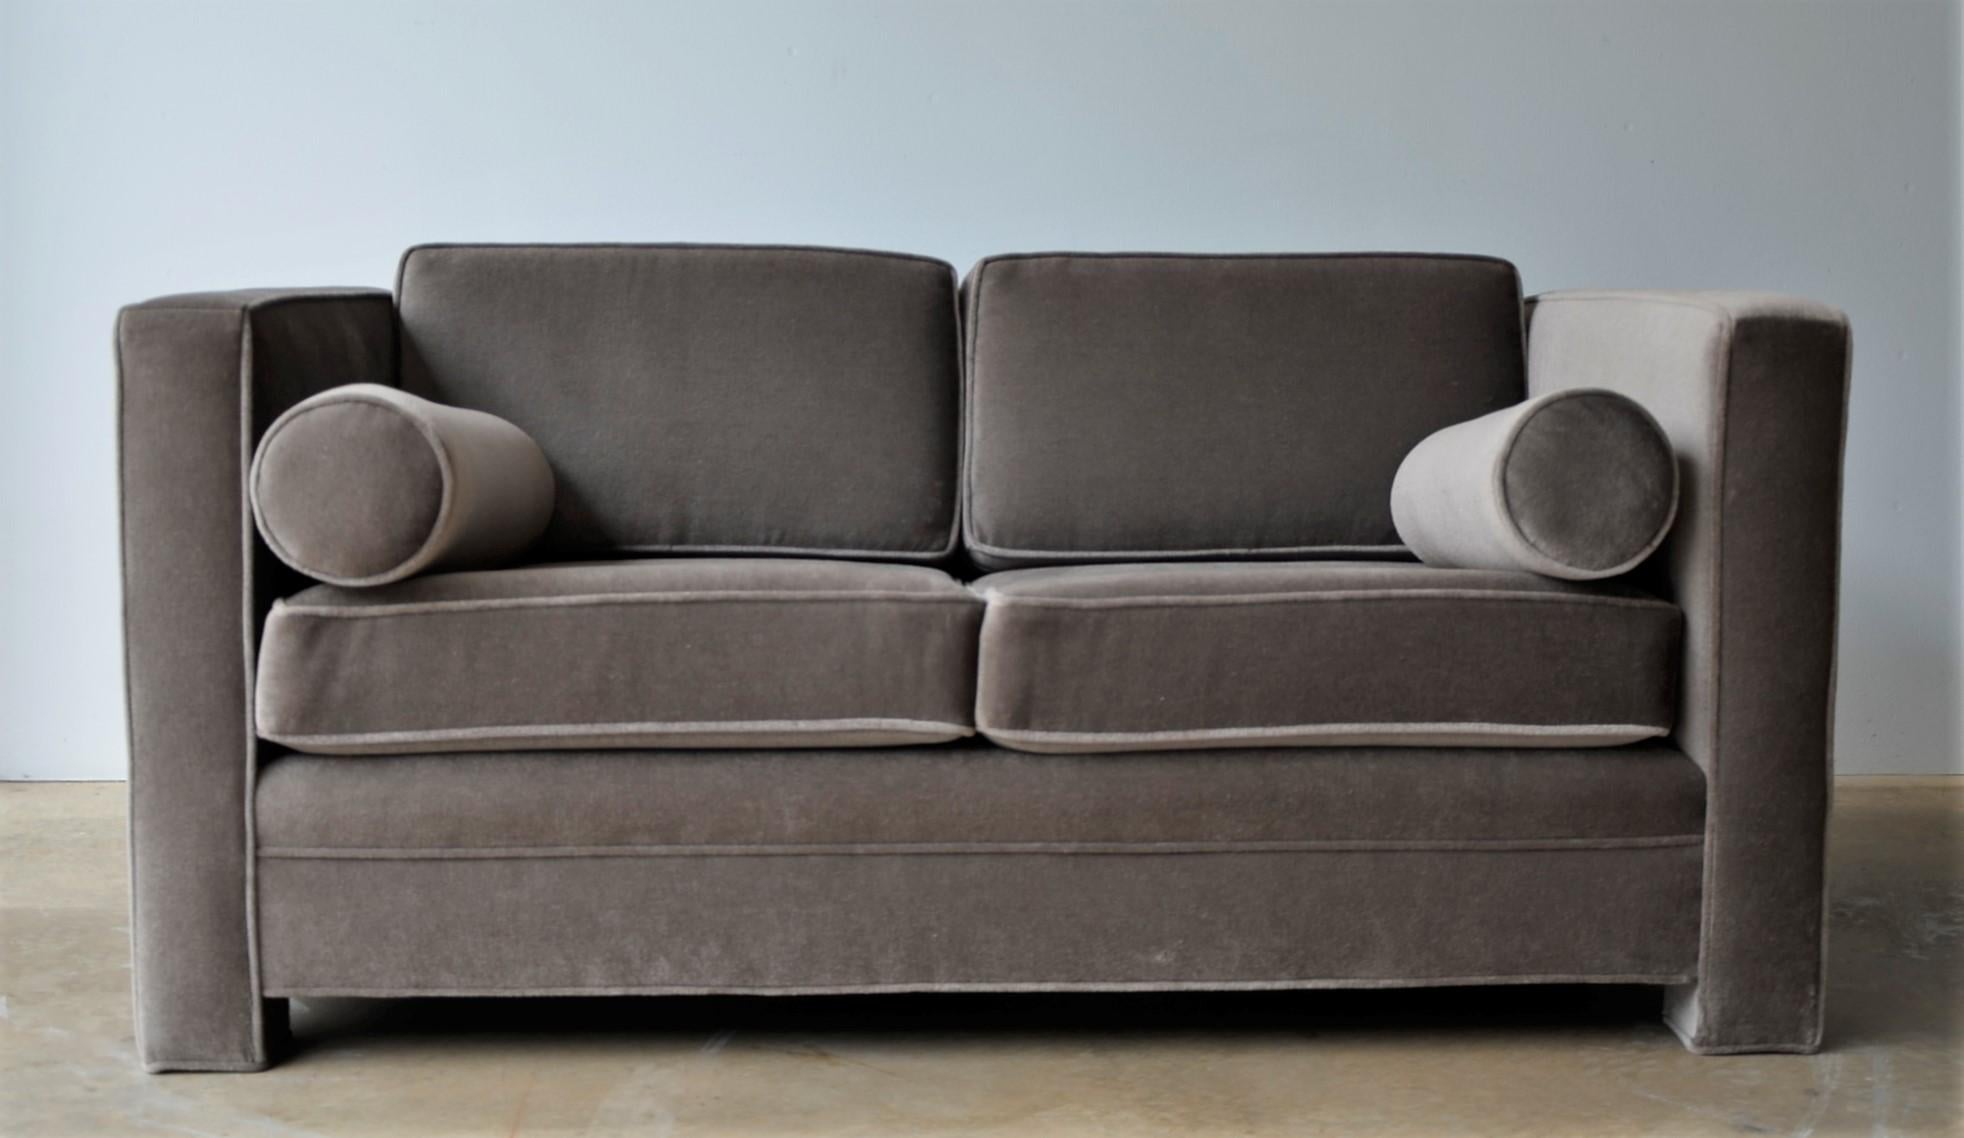 Offered is a Mid-Century Modern Milo Baughman style newly upholstered mohair wool tuxedo love seat in a warm gray or taupe color way. The piece is a two-seat sofa with two-seat cushions and two back cushions and two rolled armrest cushions. The sofa